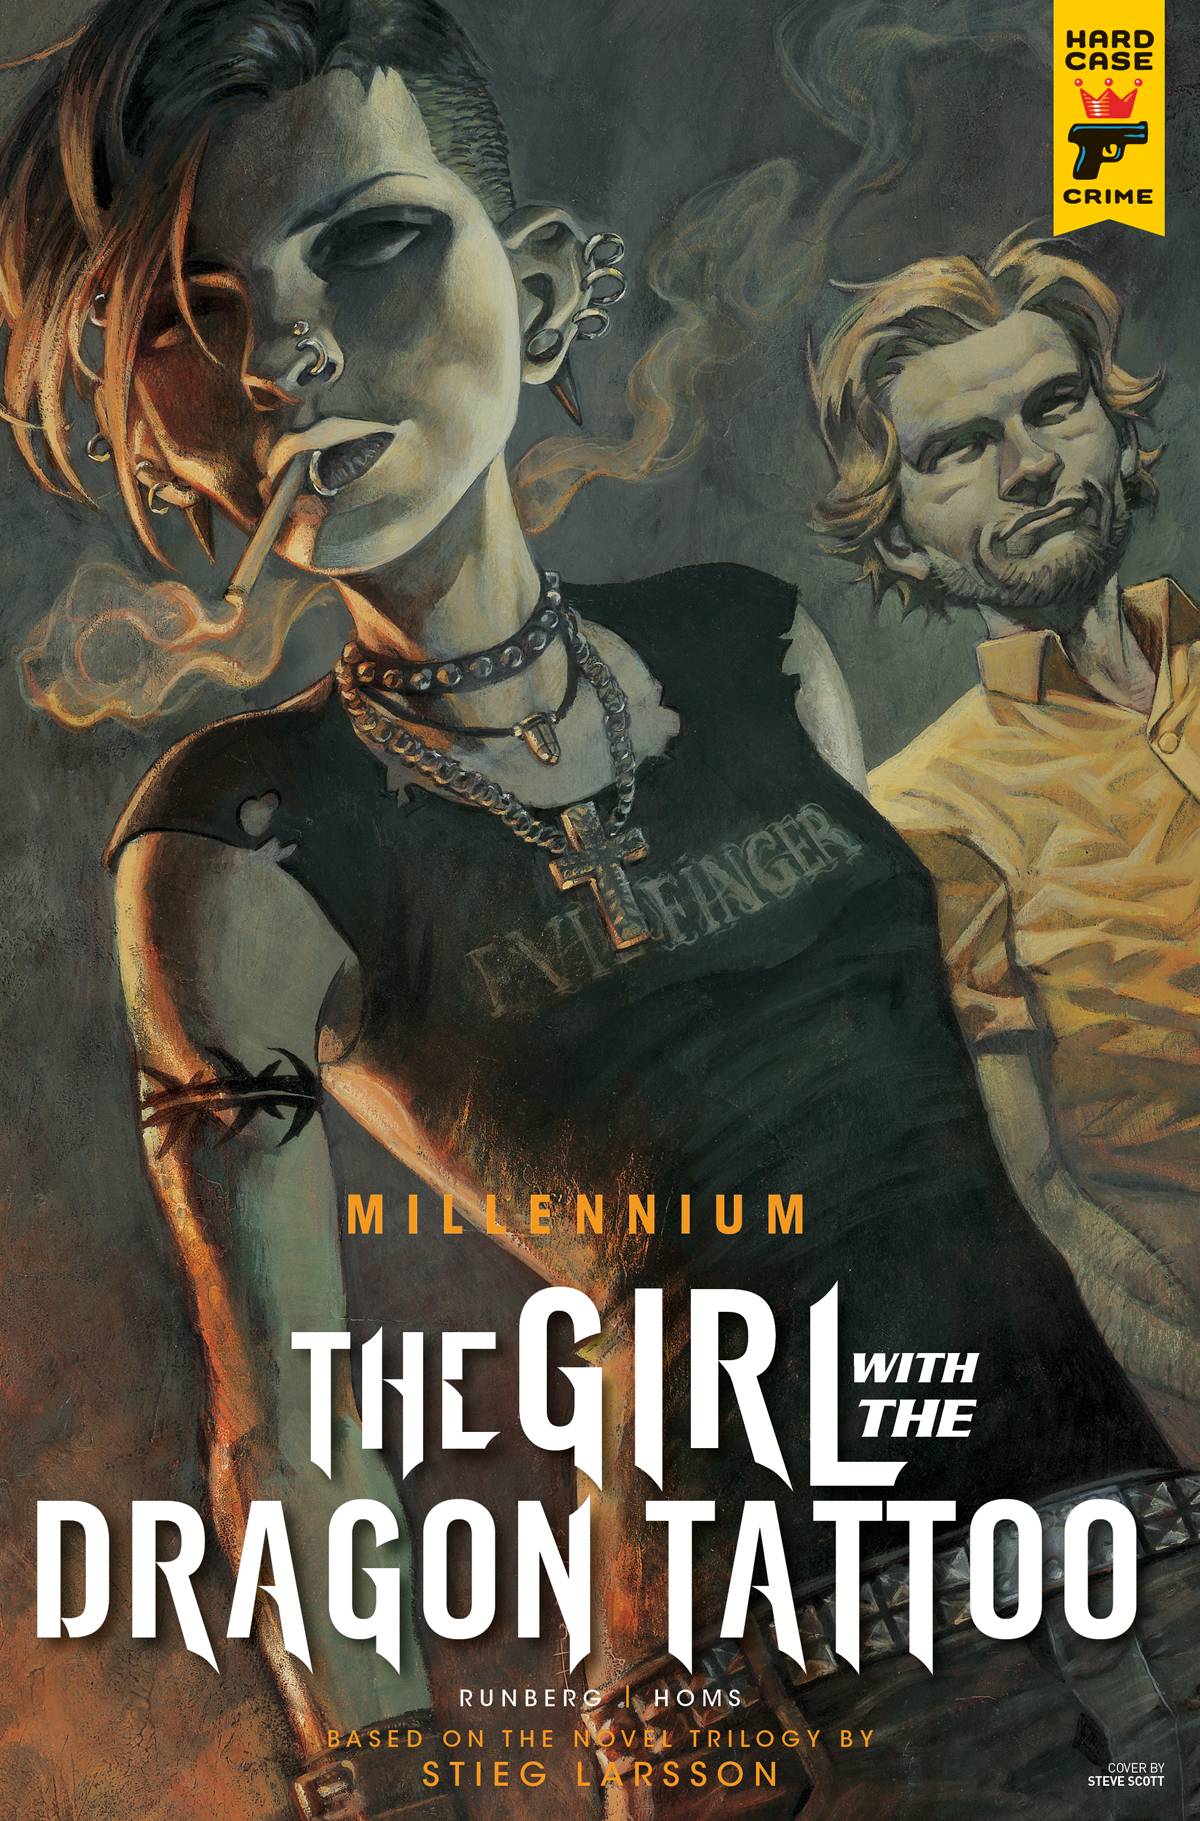 MILLENNIUM--THE GIRL WITH THE DRAGON TATTOO#2